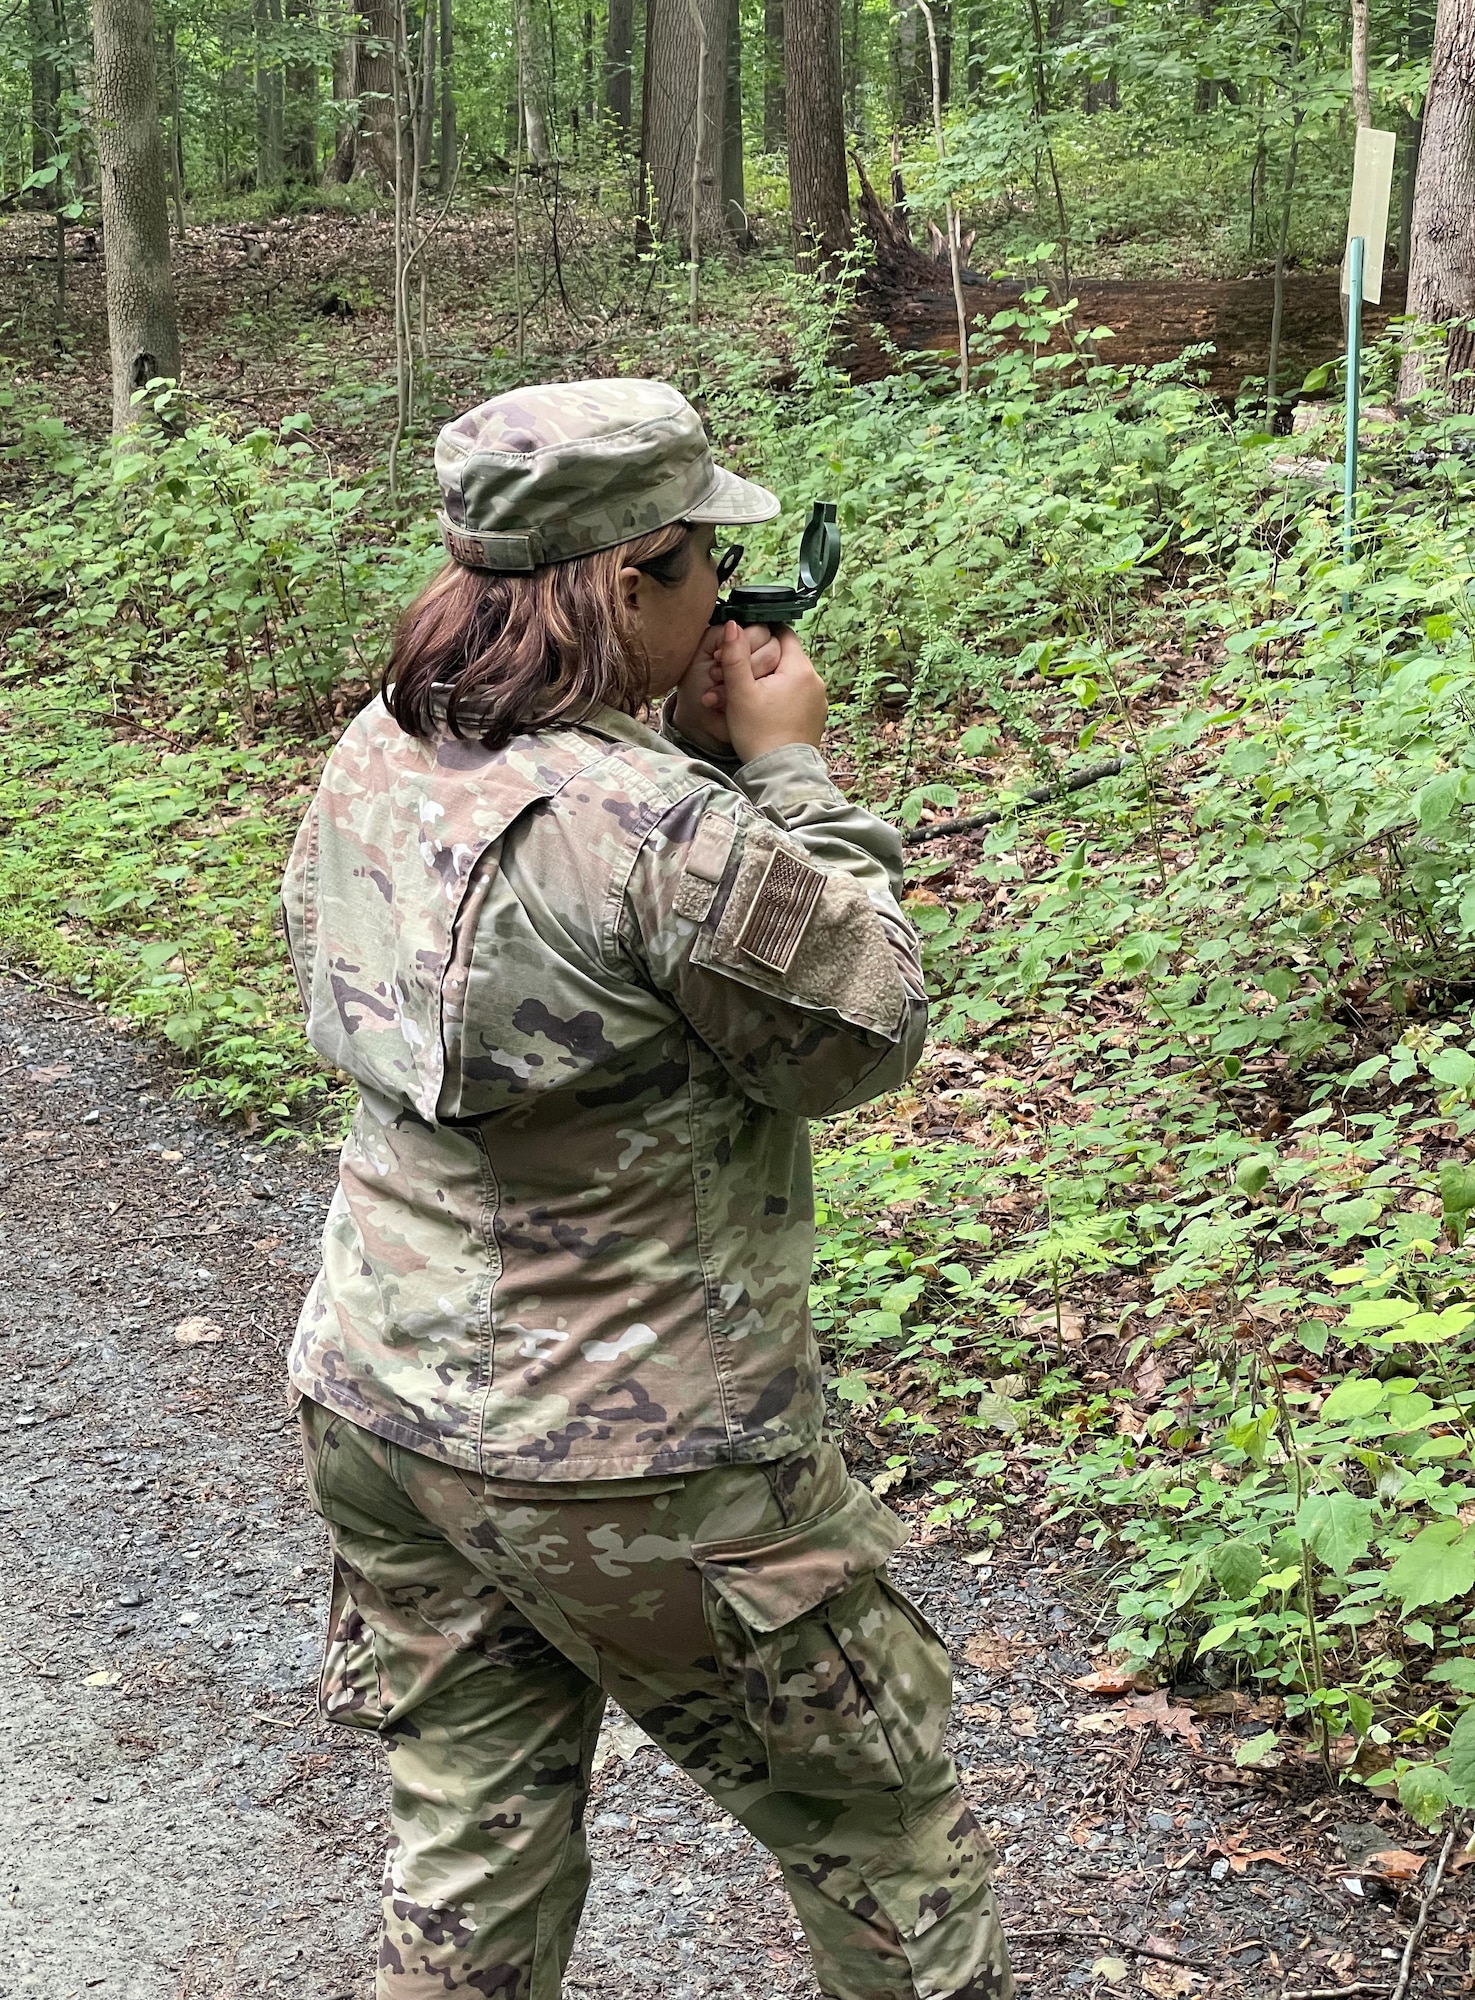 U.S. Air Force Senior Airman Alicia Buhr, a structures journeyman assigned to the 175th Civil Engineer Squadron, Maryland Air National Guard, participates in land navigation training at the Blum Military Reservation, Glen Arm, Maryland, June 24, 2022.